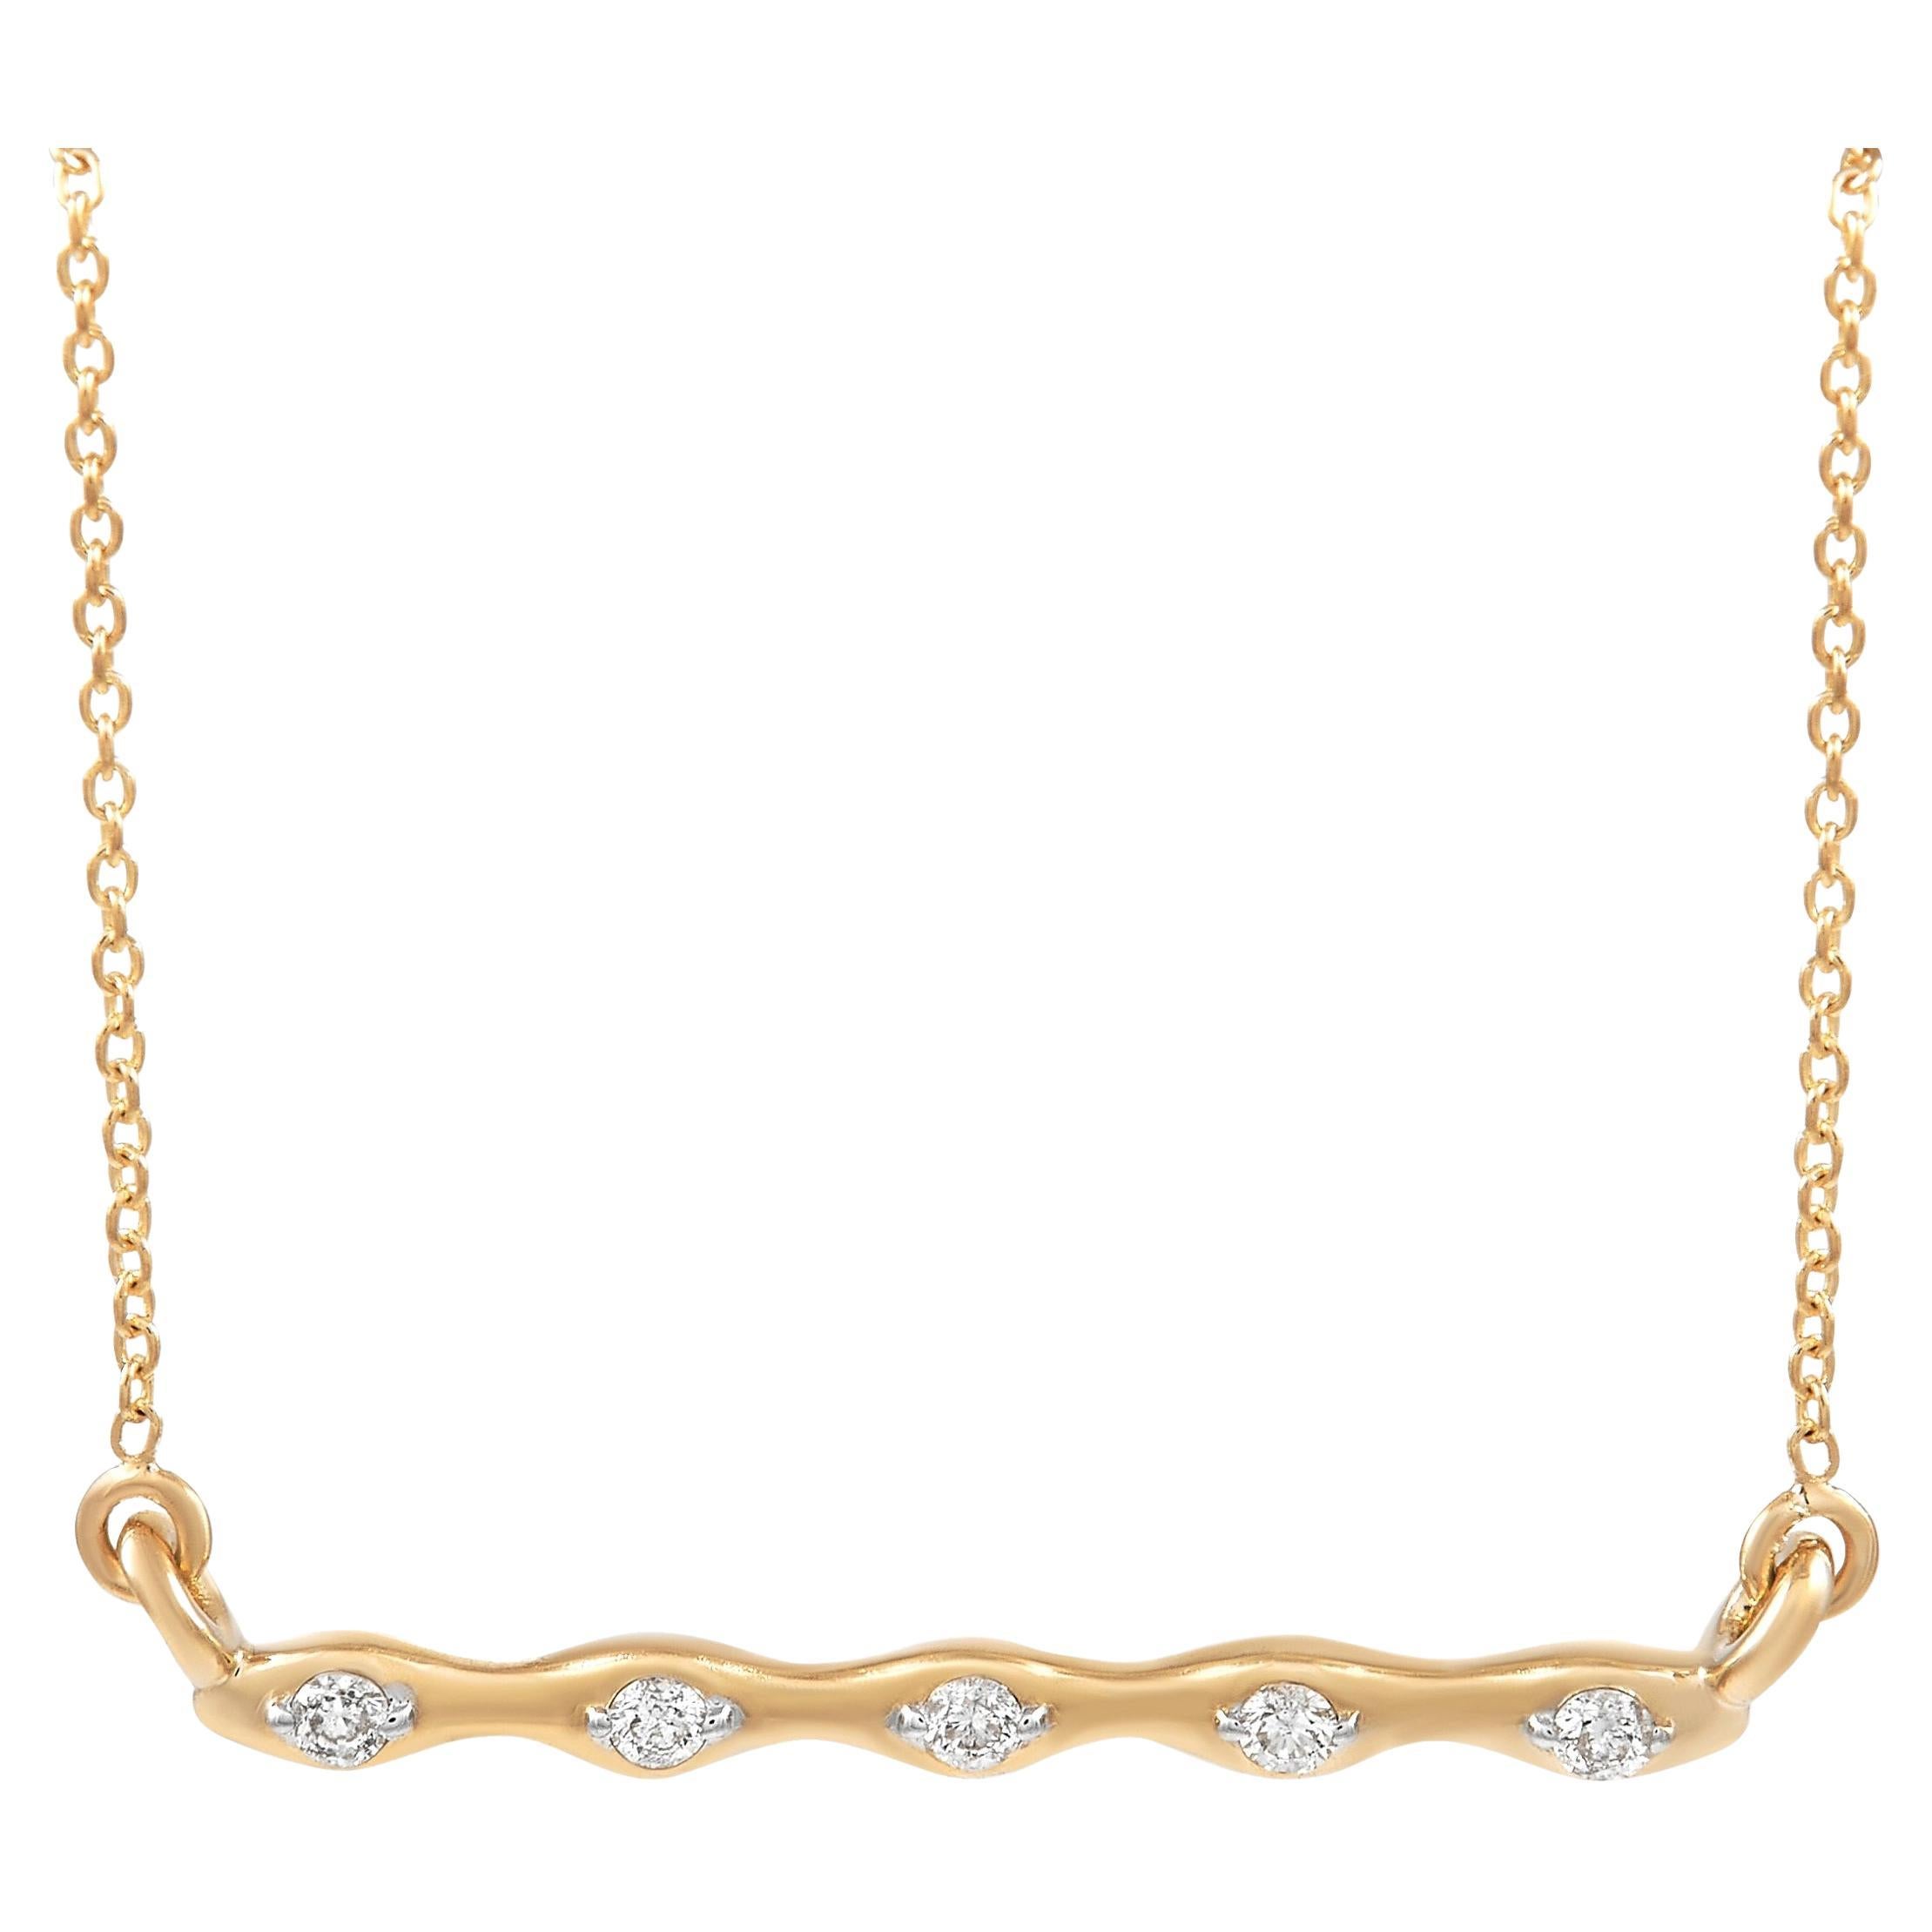 LB Exclusive 14K Yellow Gold 0.06 Ct Diamond Necklace